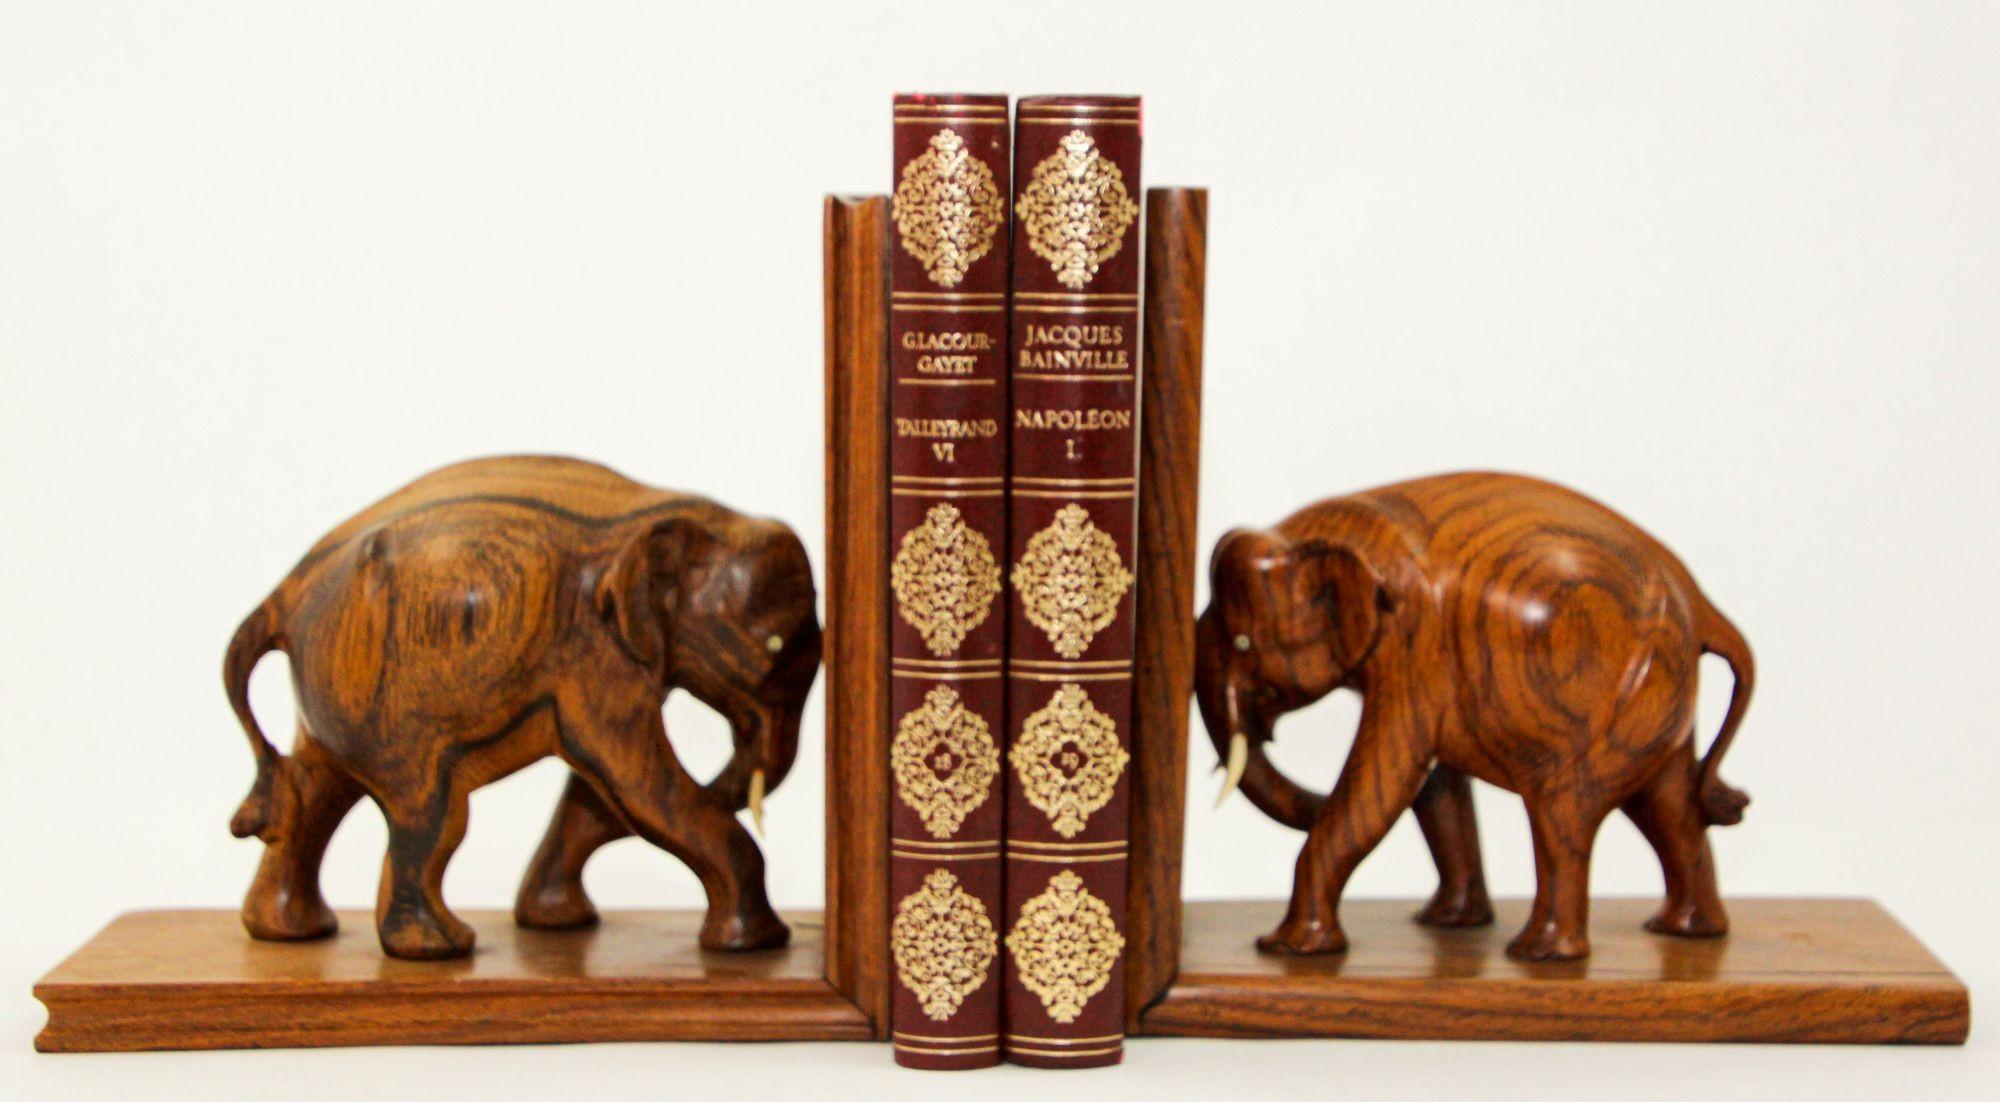 Large vintage Asian hand-carved wood elephant bookends.
Vintage 1940s wooden bookends with carved elephant sculptures carvings.
A wonderful quality pair of French Art Deco style hand-carved wooden elephant bookends.
These handcrafted set of two